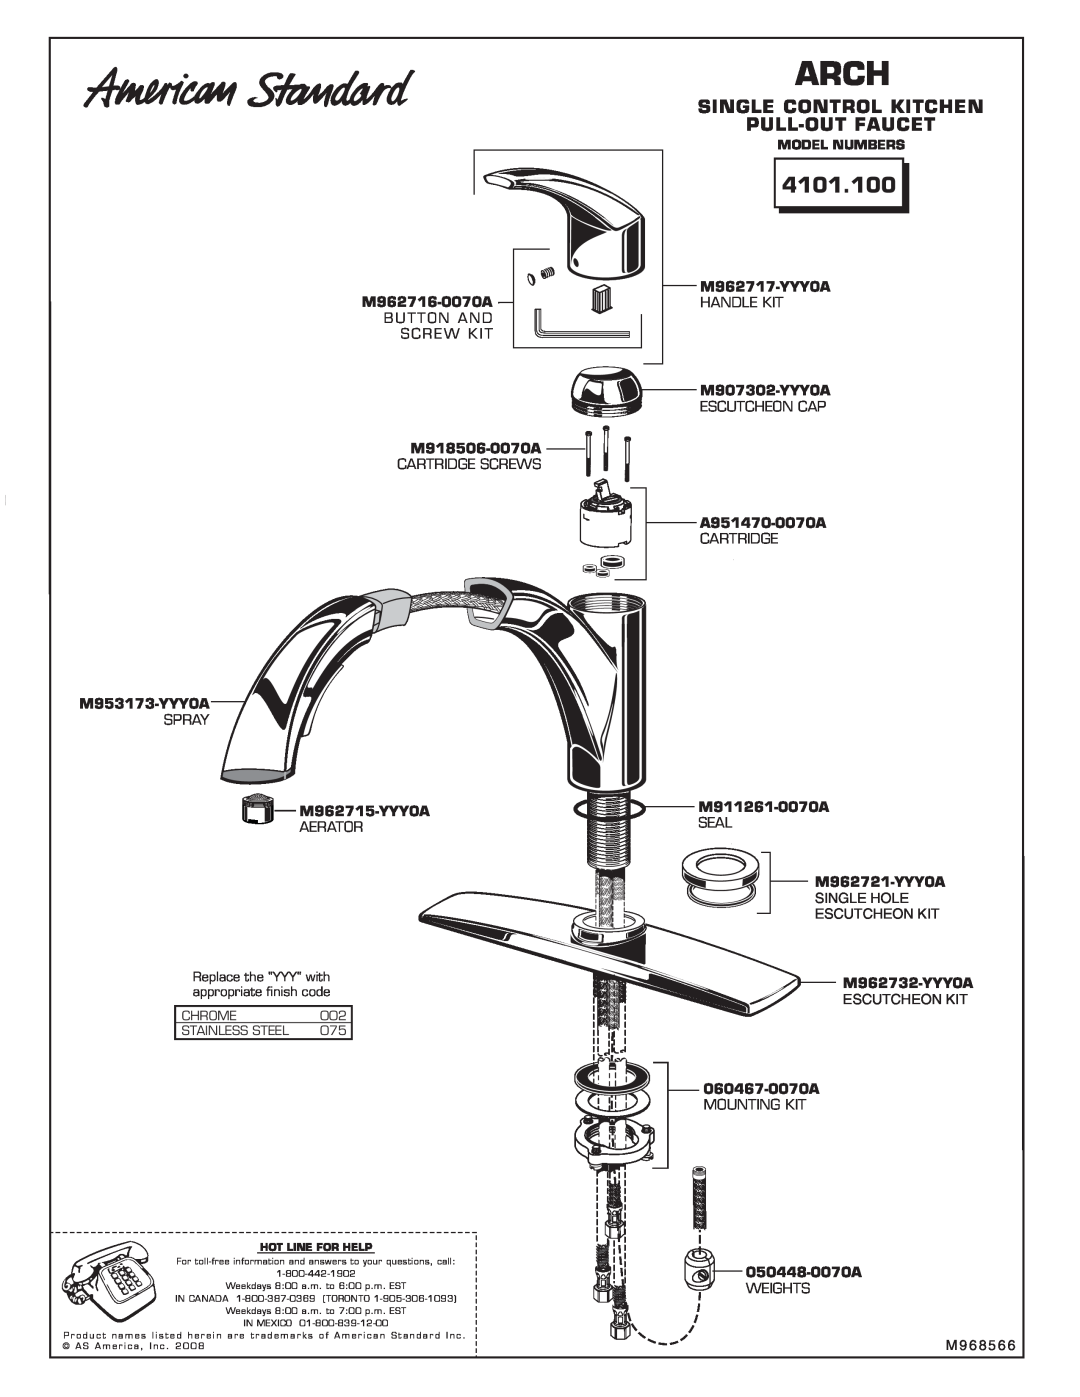 American Standard M968566 installation instructions Arch, 4101.100, Single Control Kitchen Pull-Outfaucet 